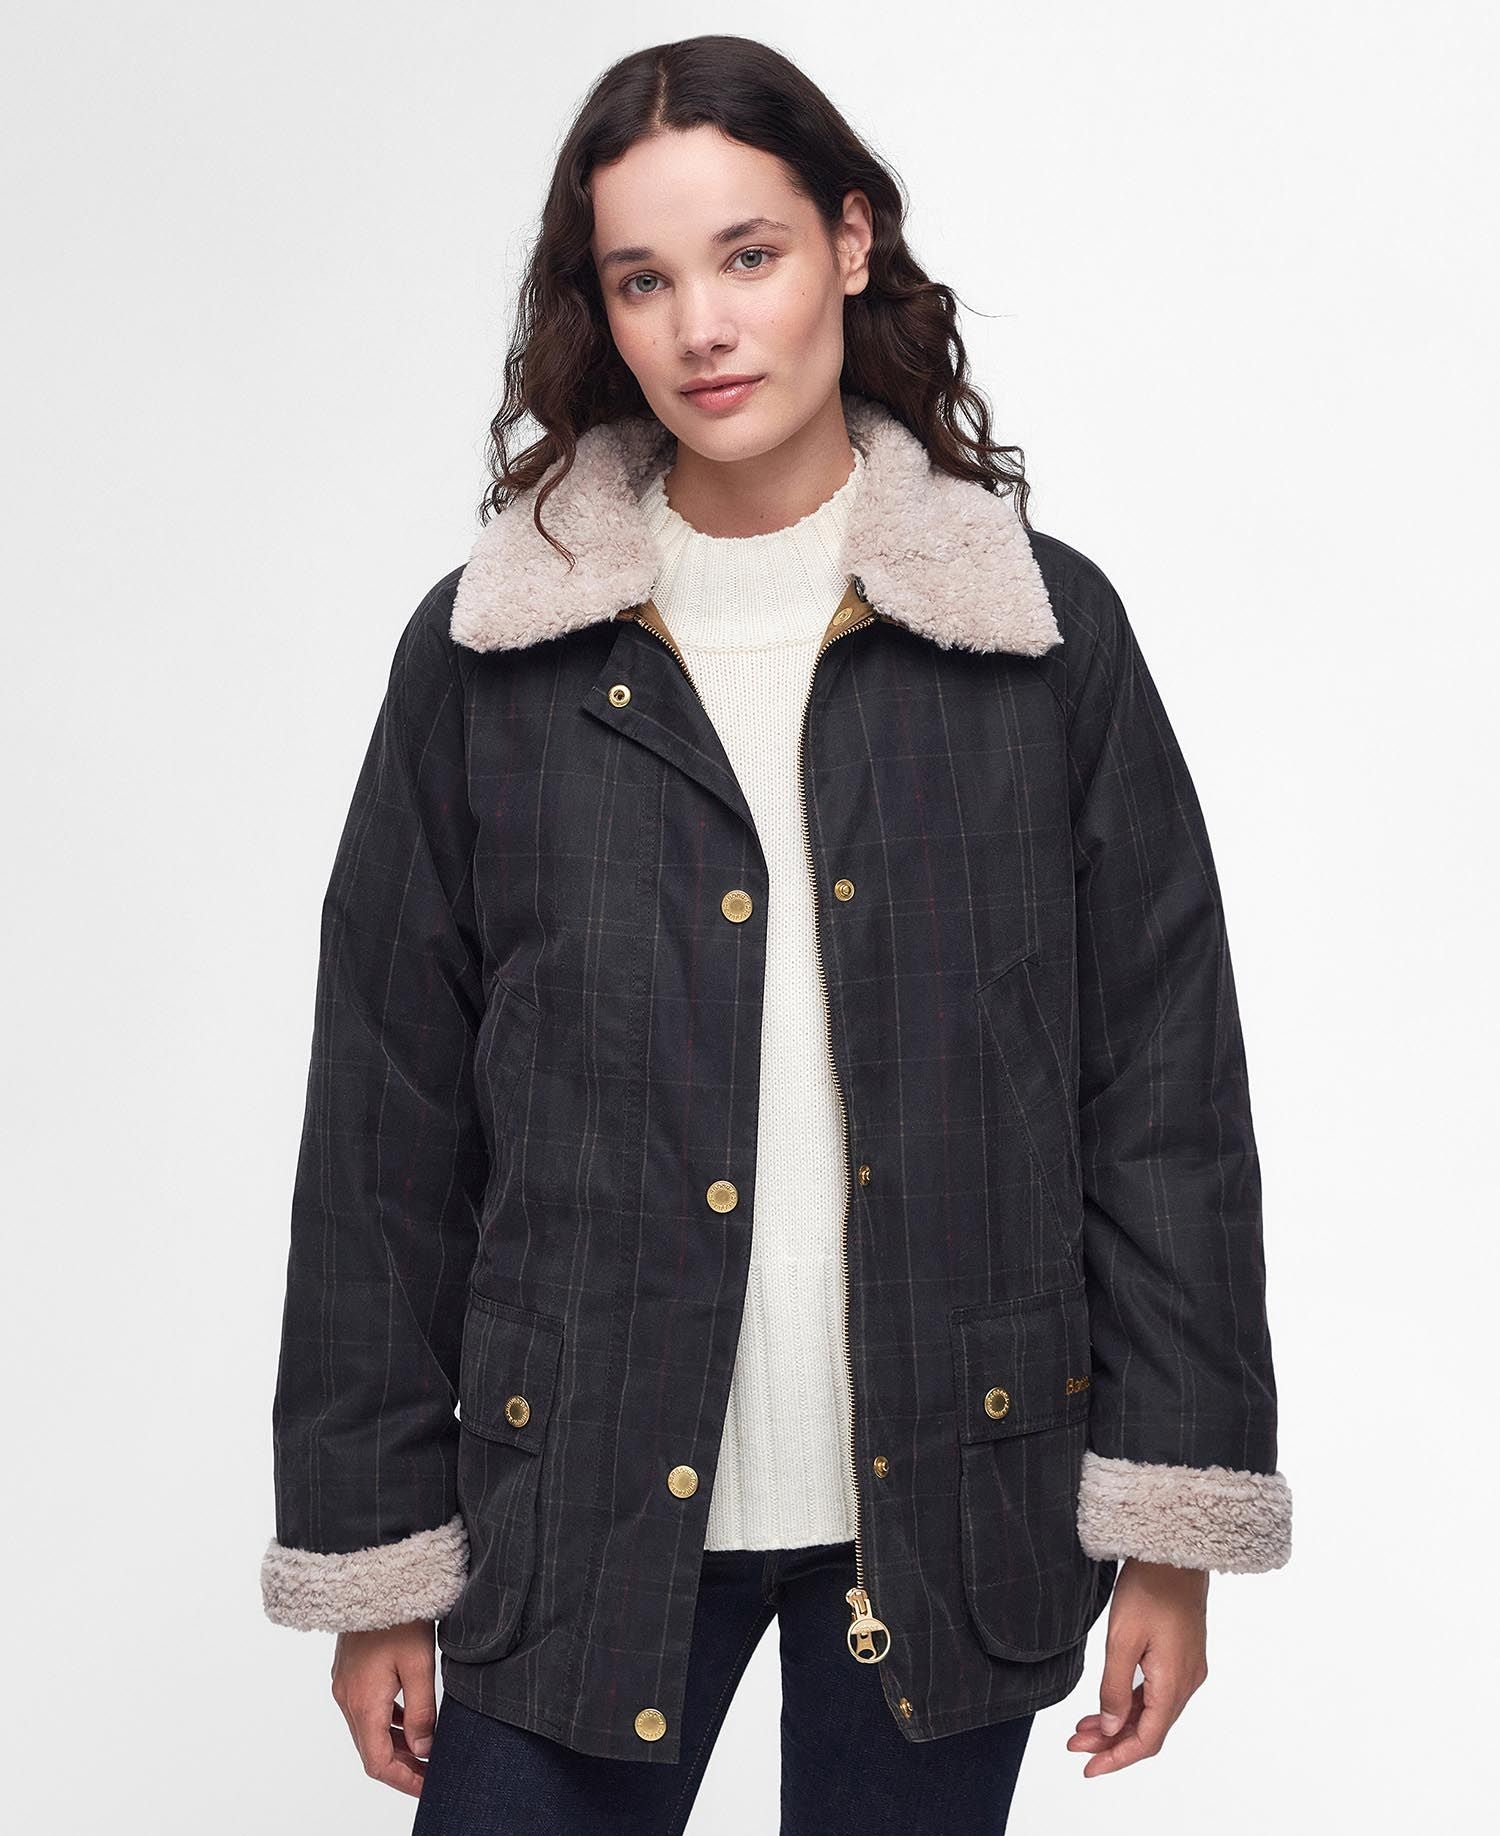 Swainby Waxed Jacket - Dull Classic/Classic